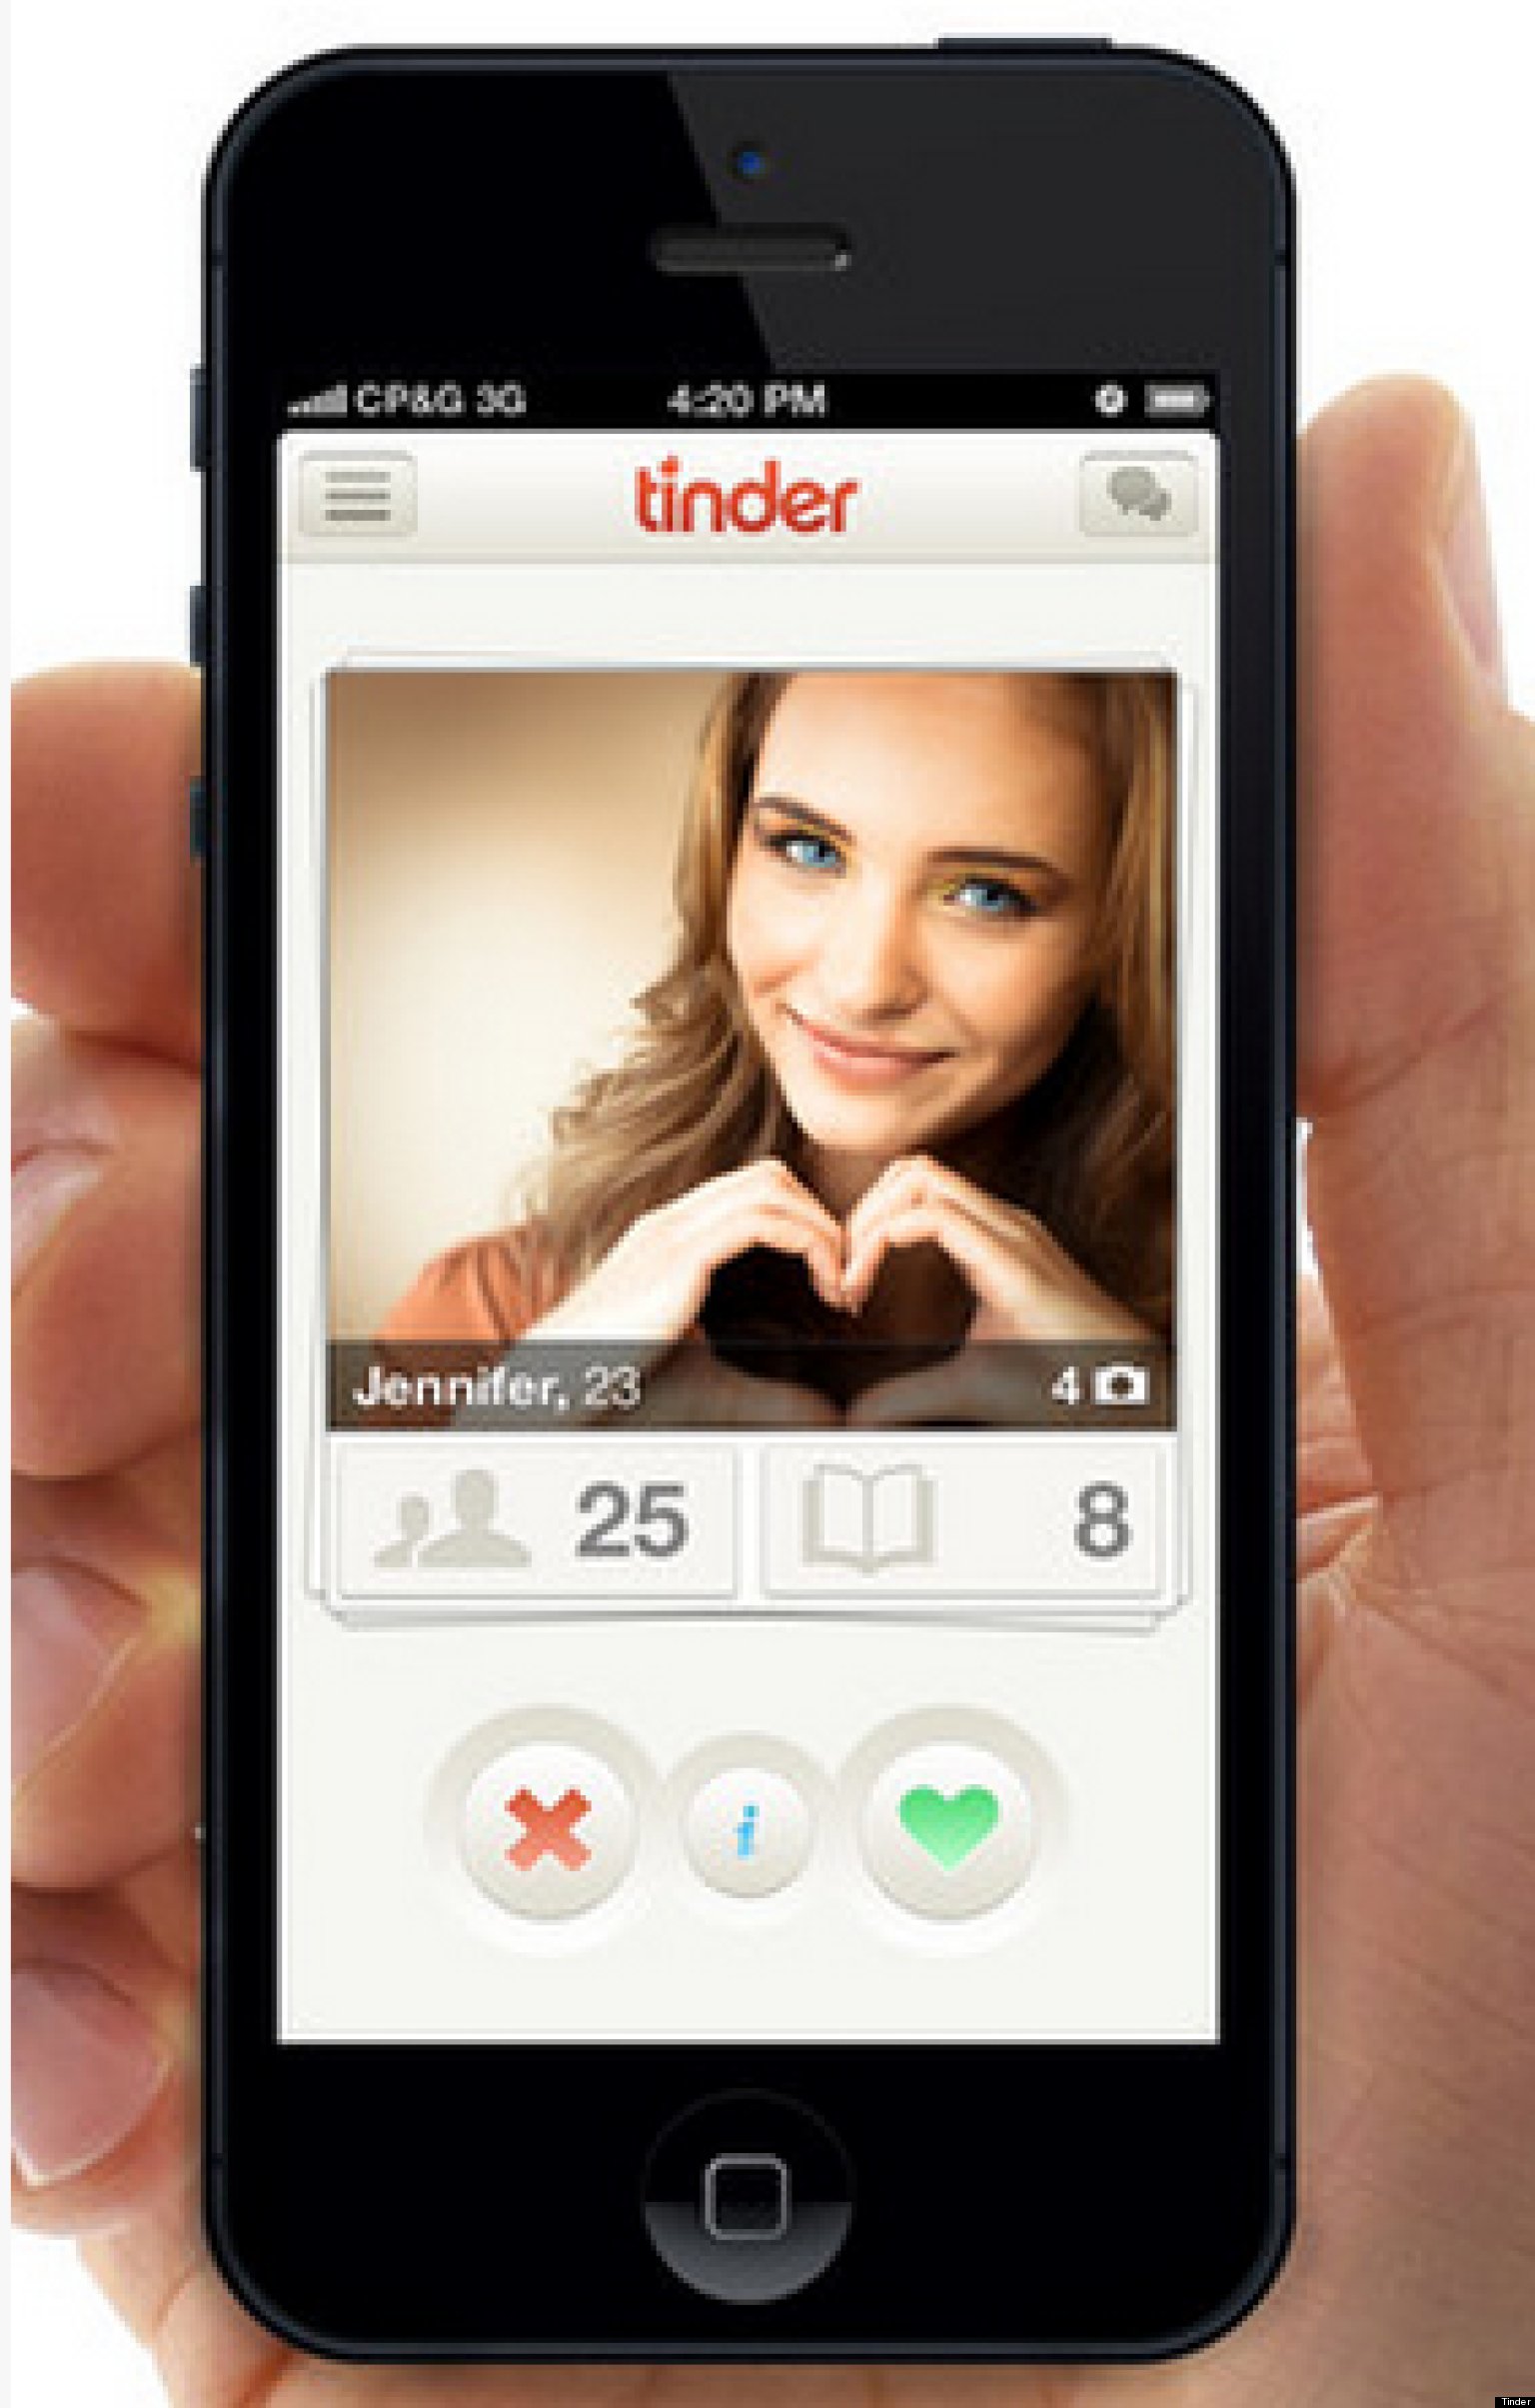 61 Tinder Consumer Reviews and Complaints